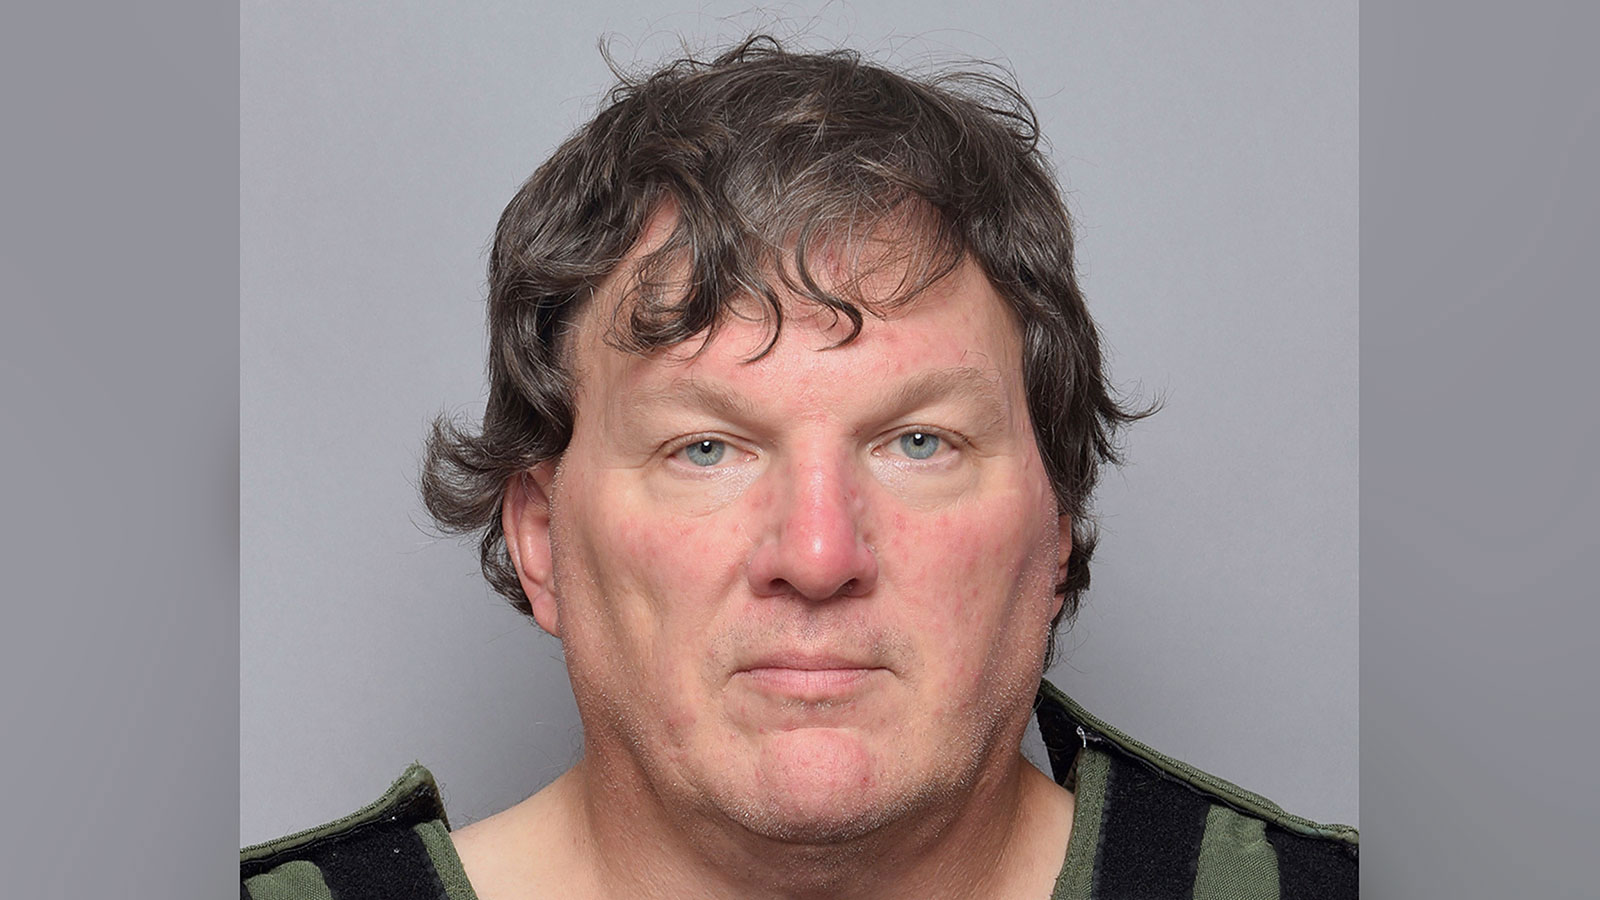 Suffolk County Sheriff’s Office released a booking photo of Rex Heuermann.